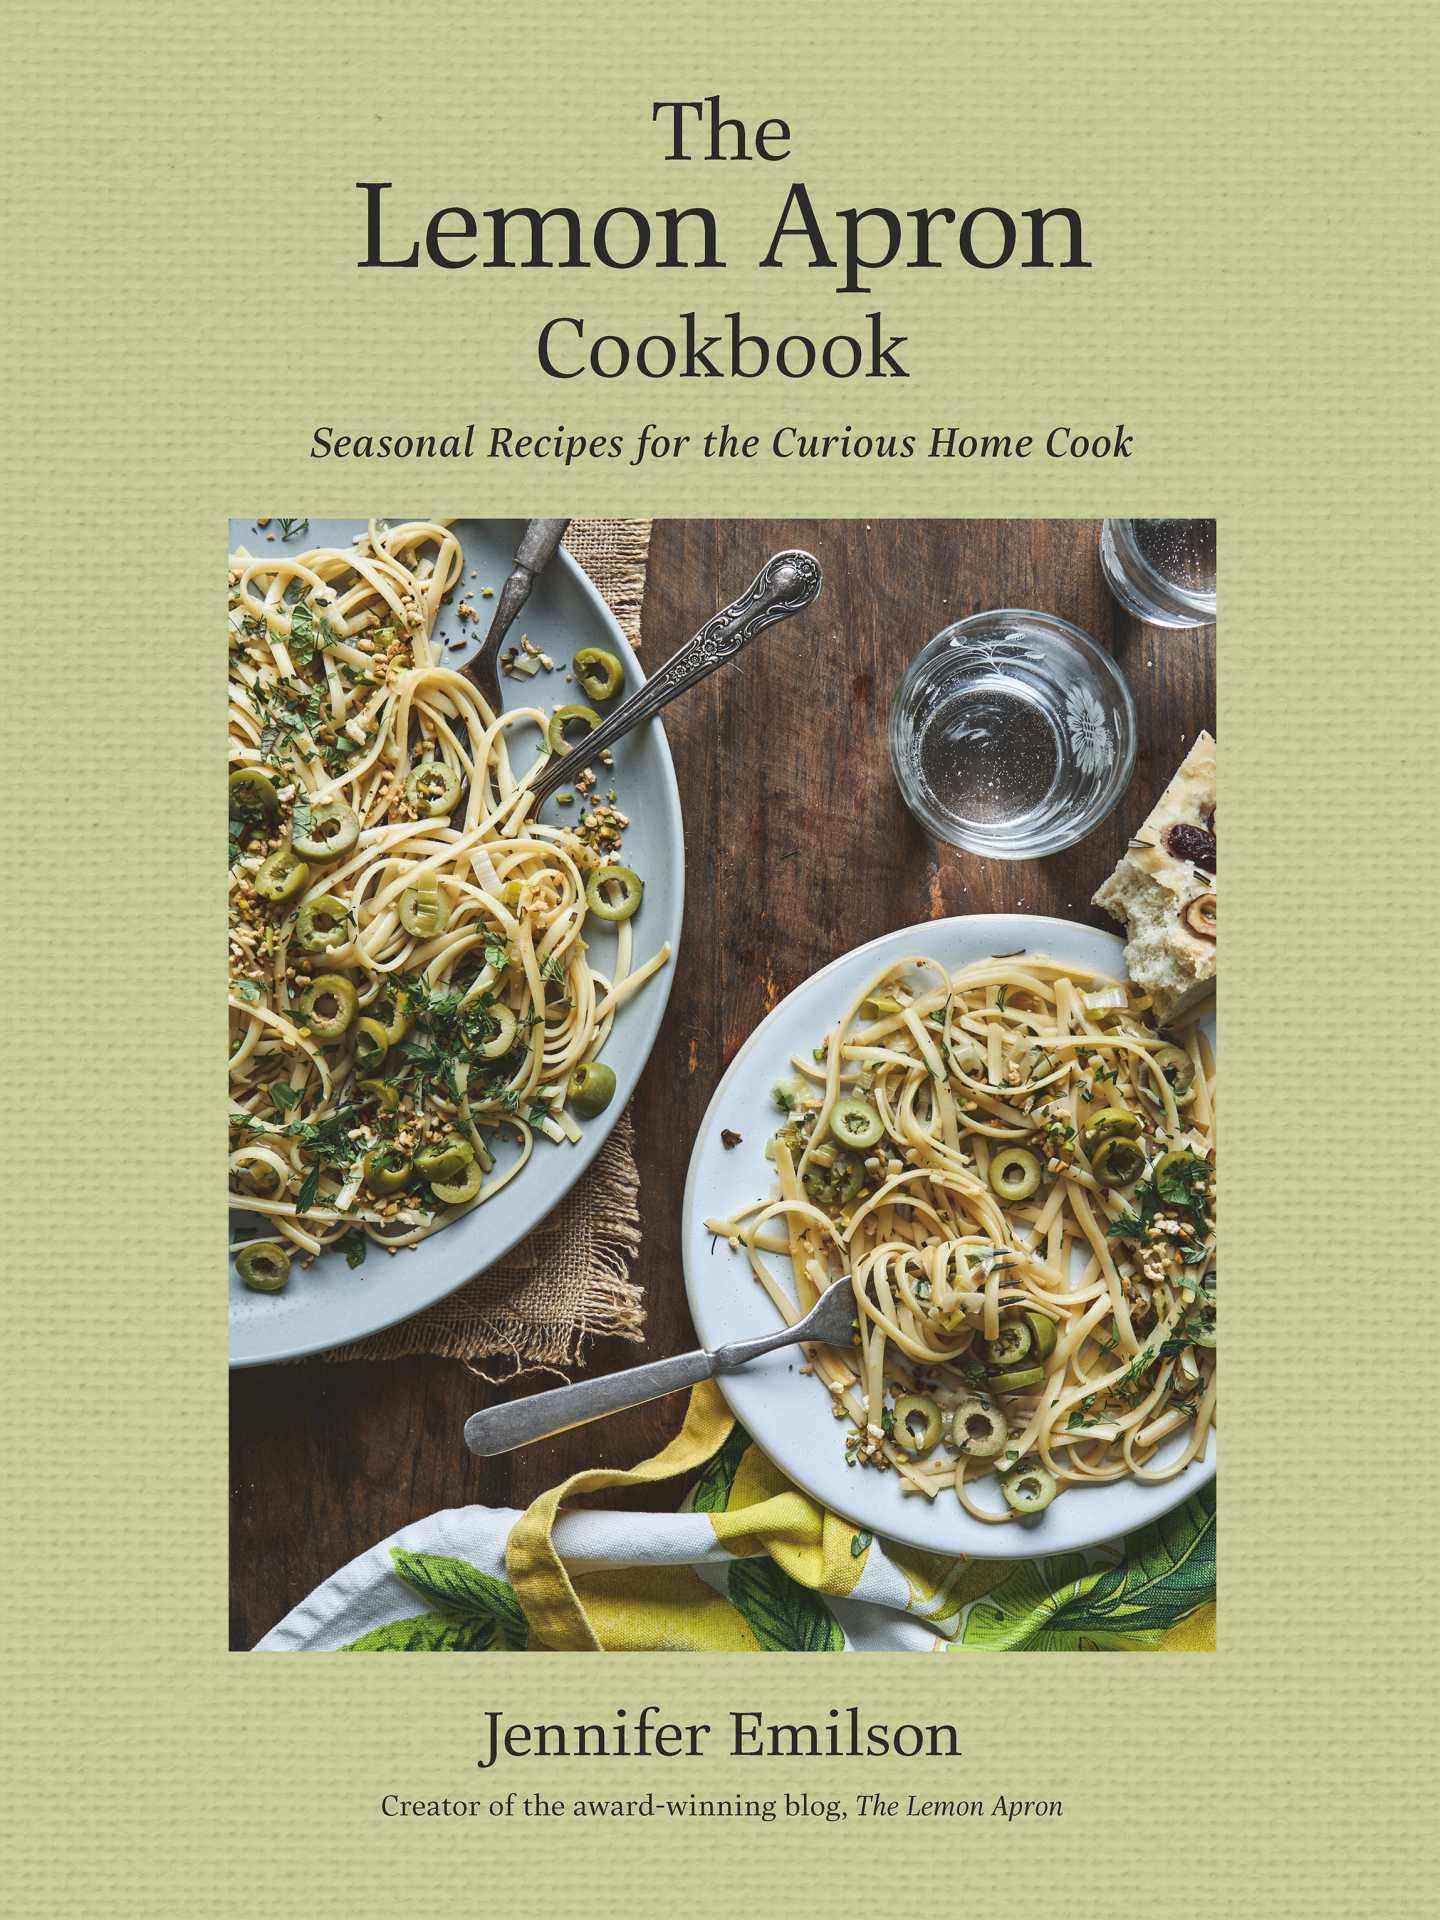 Winter recipes from The Lemon Apron cookbook